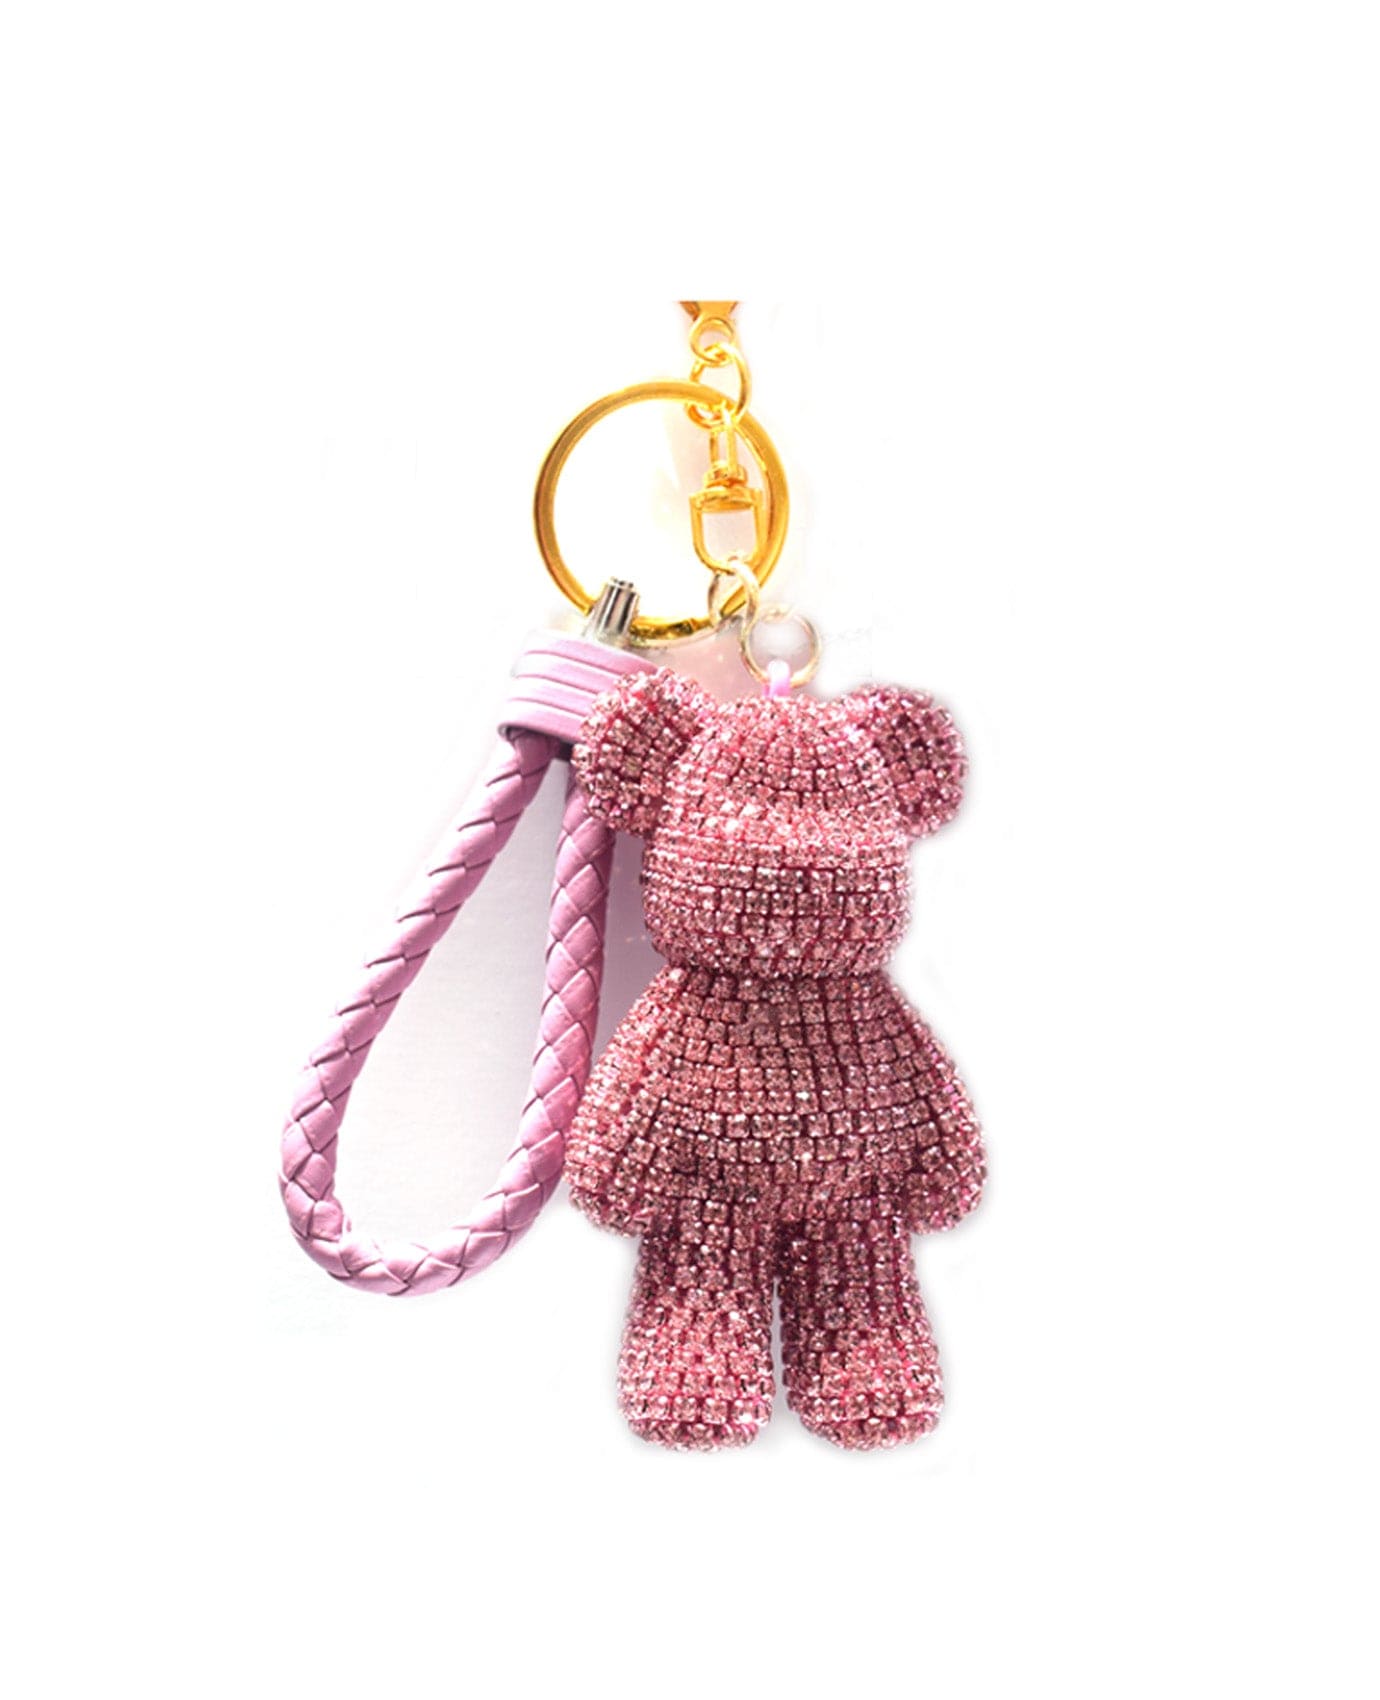 Rope Them In Mint Authentic Louis Vuitton Key Chain